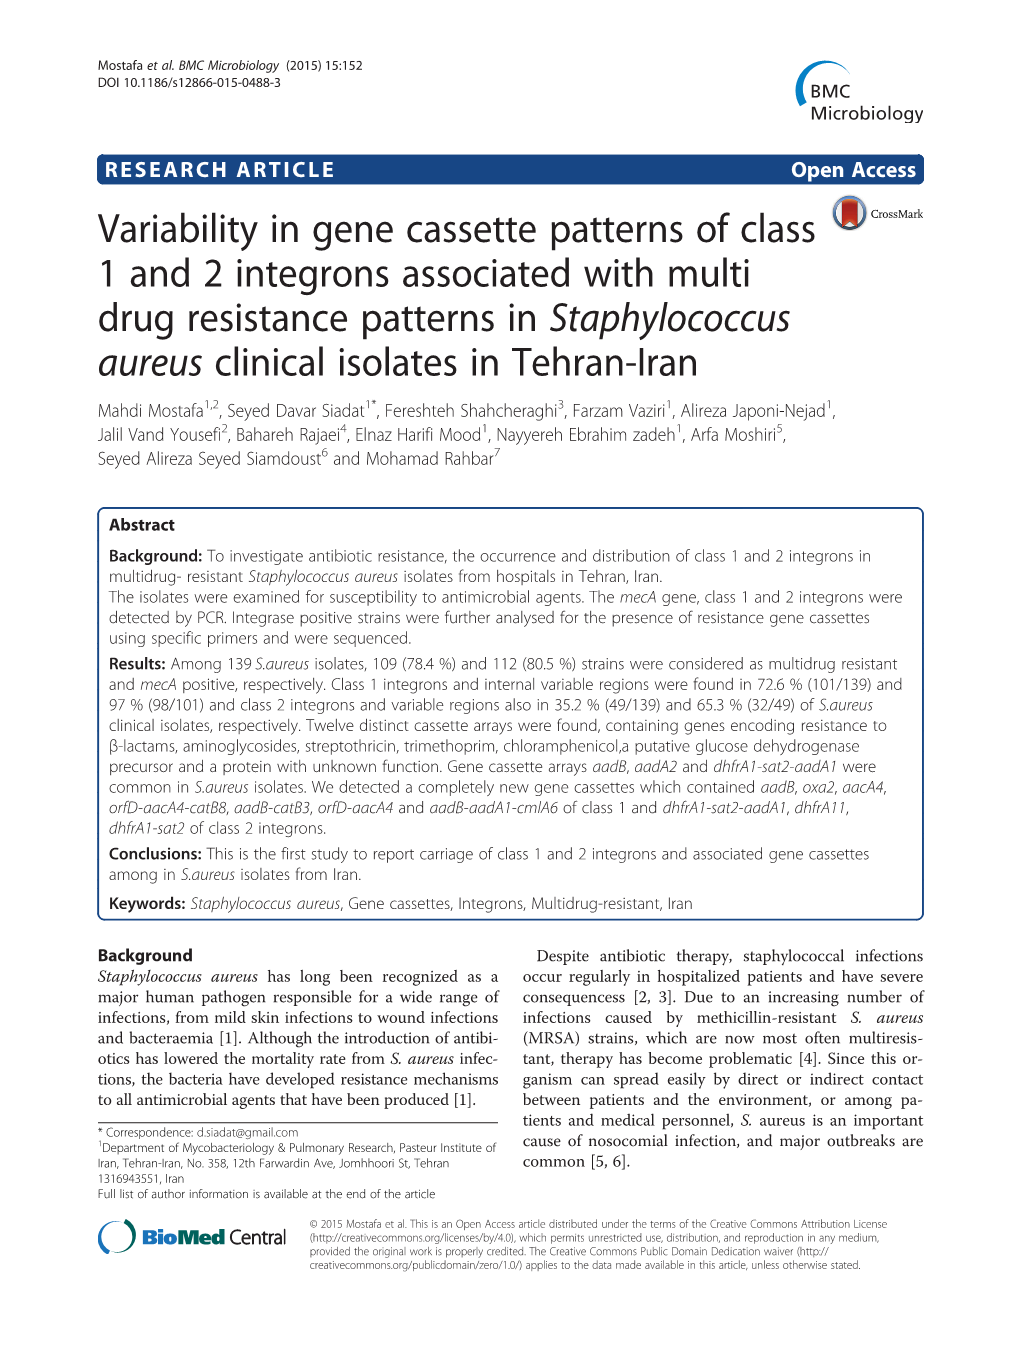 Variability in Gene Cassette Patterns of Class 1 and 2 Integrons Associated